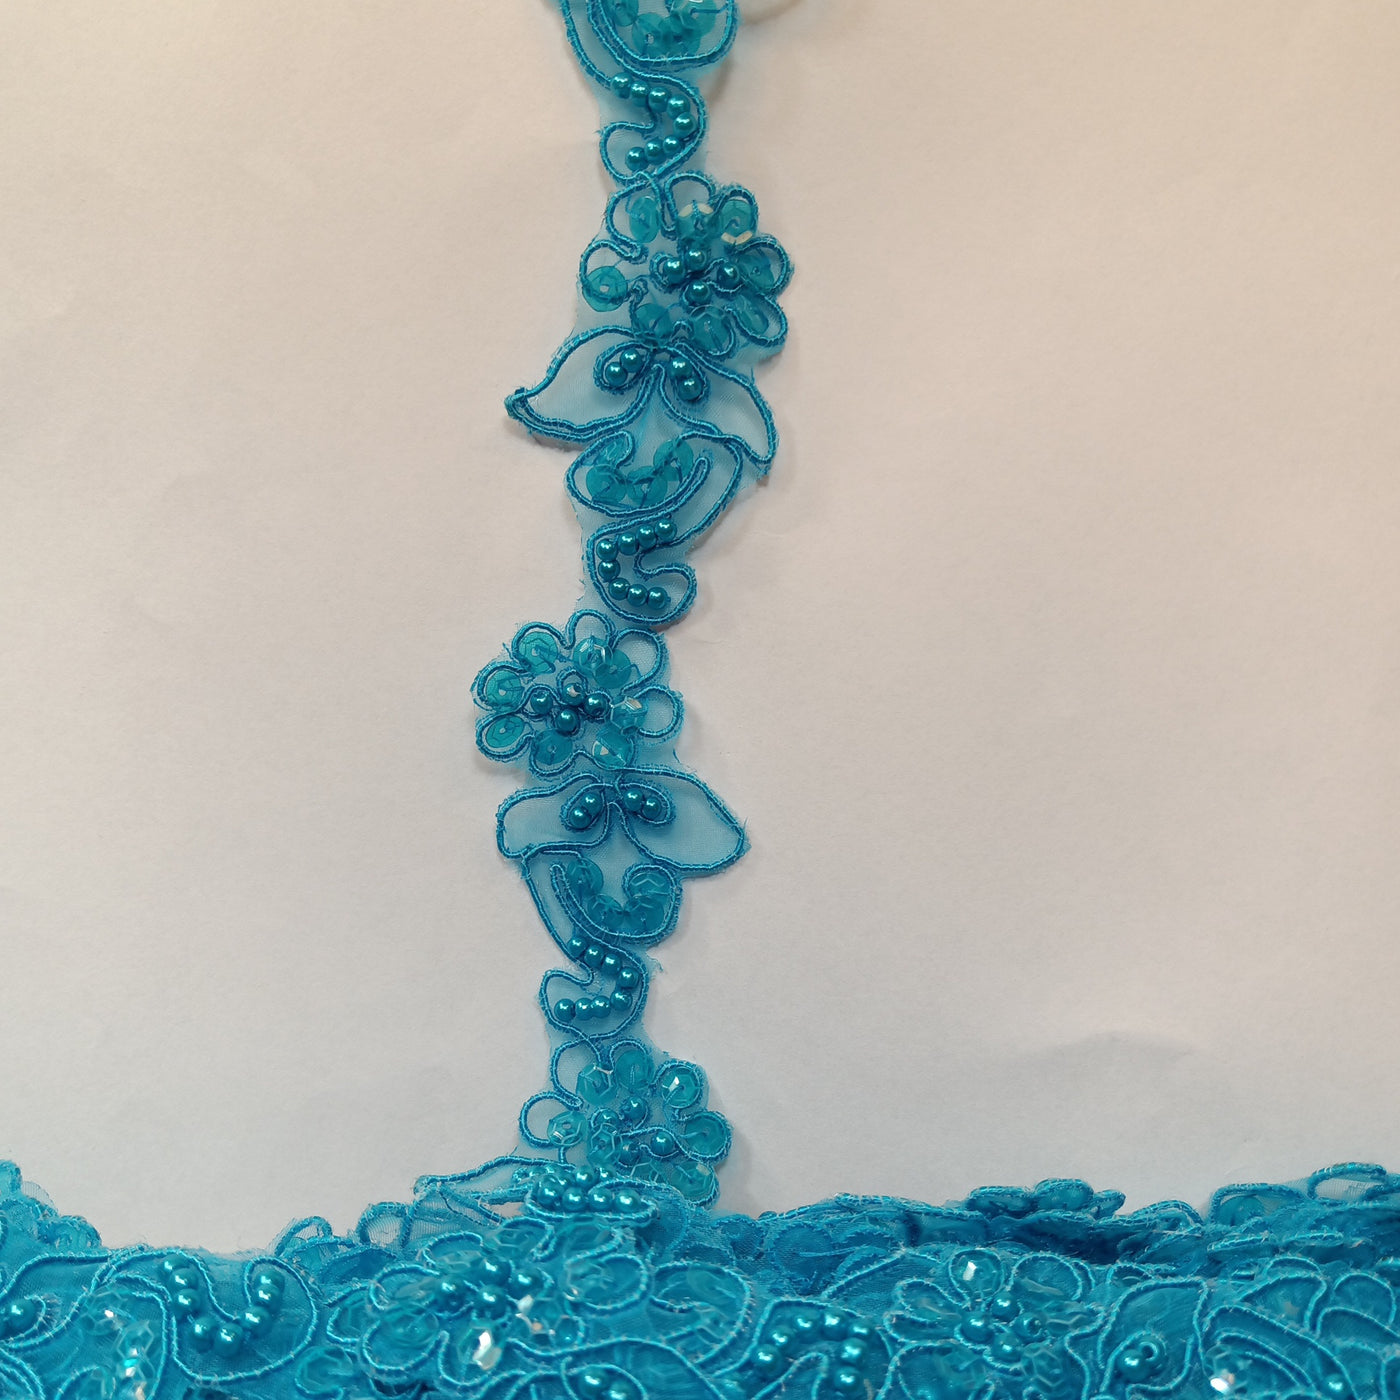 Corded & Beaded Turquoise Trimming Lace, Embroidered on 100% Polyester Organza. Sold by the Yard.  Lace Usa